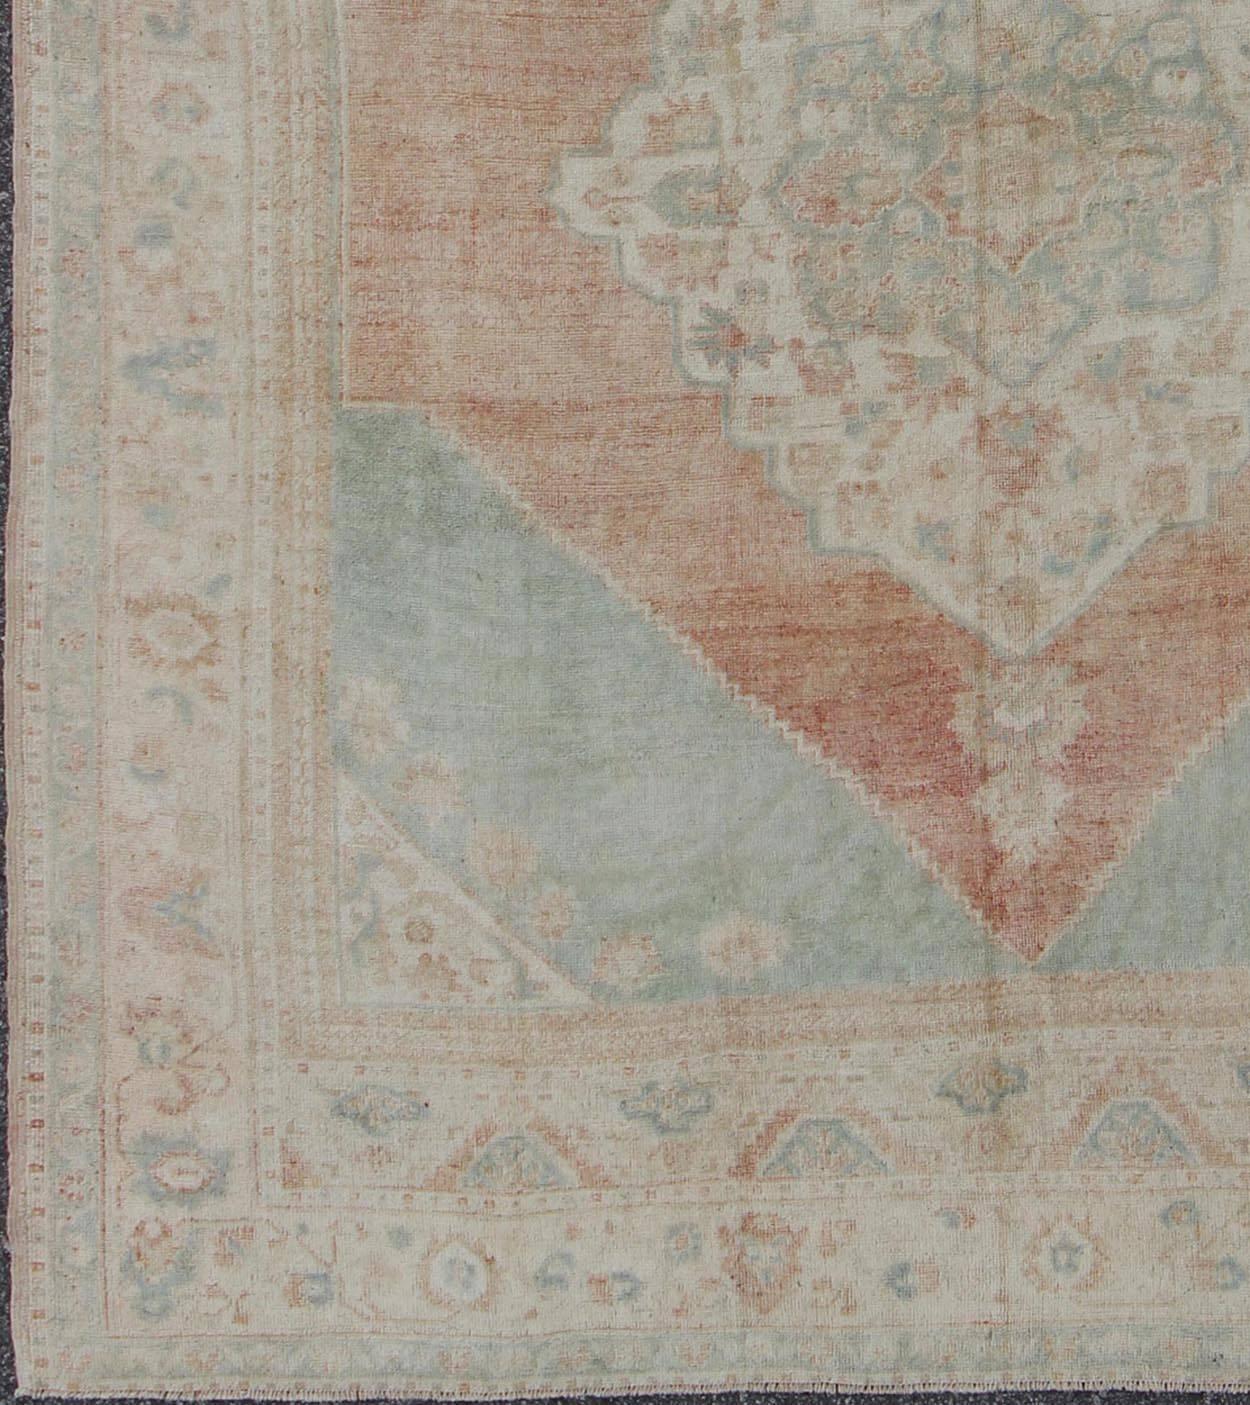 Light blue, topaz, faded grey and rust vintage Turkish Oushak rug in squared shape with layered Medallion, rug en-4093, country of origin / type: Turkey / Oushak, circa 1930

This striking vintage Turkish Oushak rug bears a faded grey-colored body